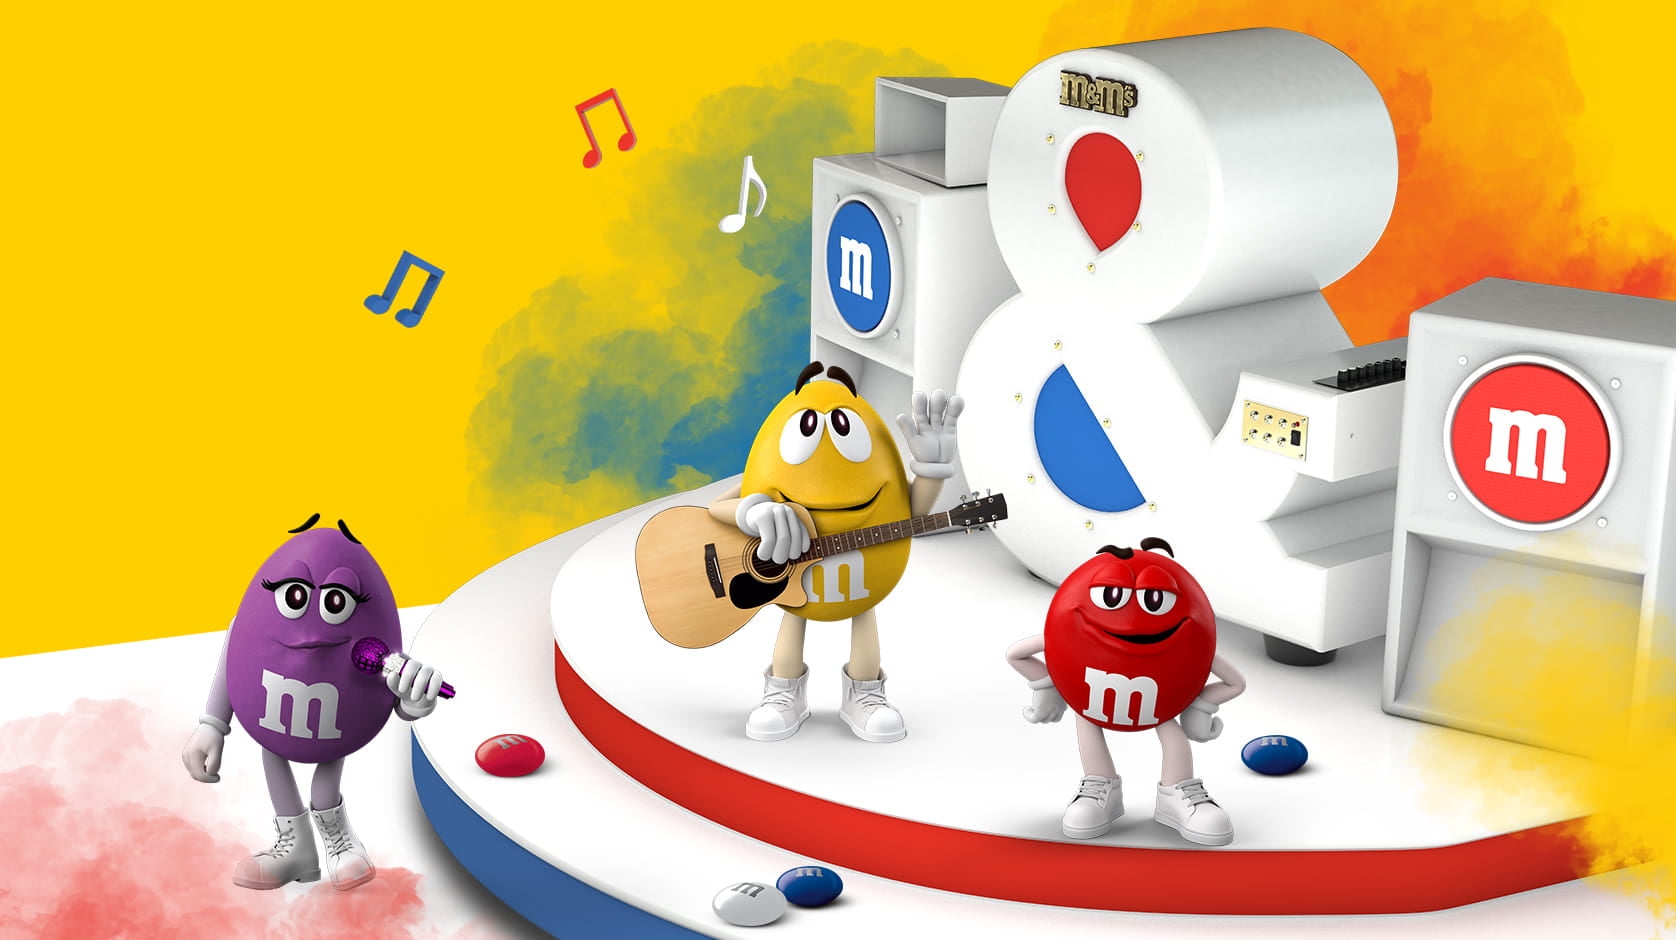 Mars M&m: Mars gives six M&M characters a makeover to promote